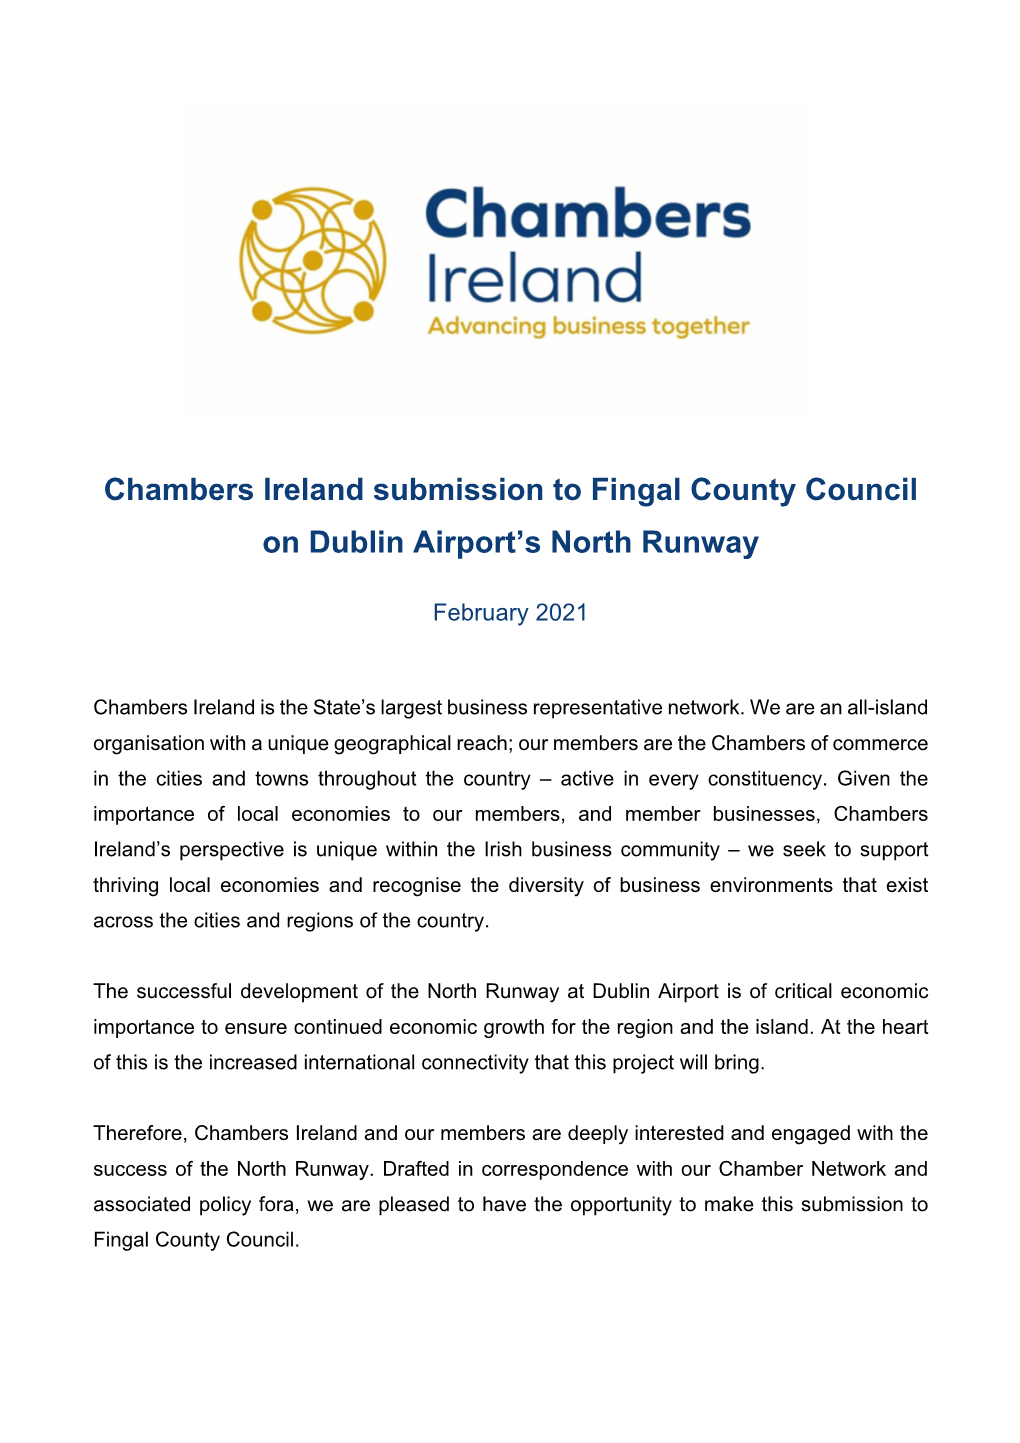 Chambers Ireland Submission to Fingal County Council on Dublin Airport's North Runway